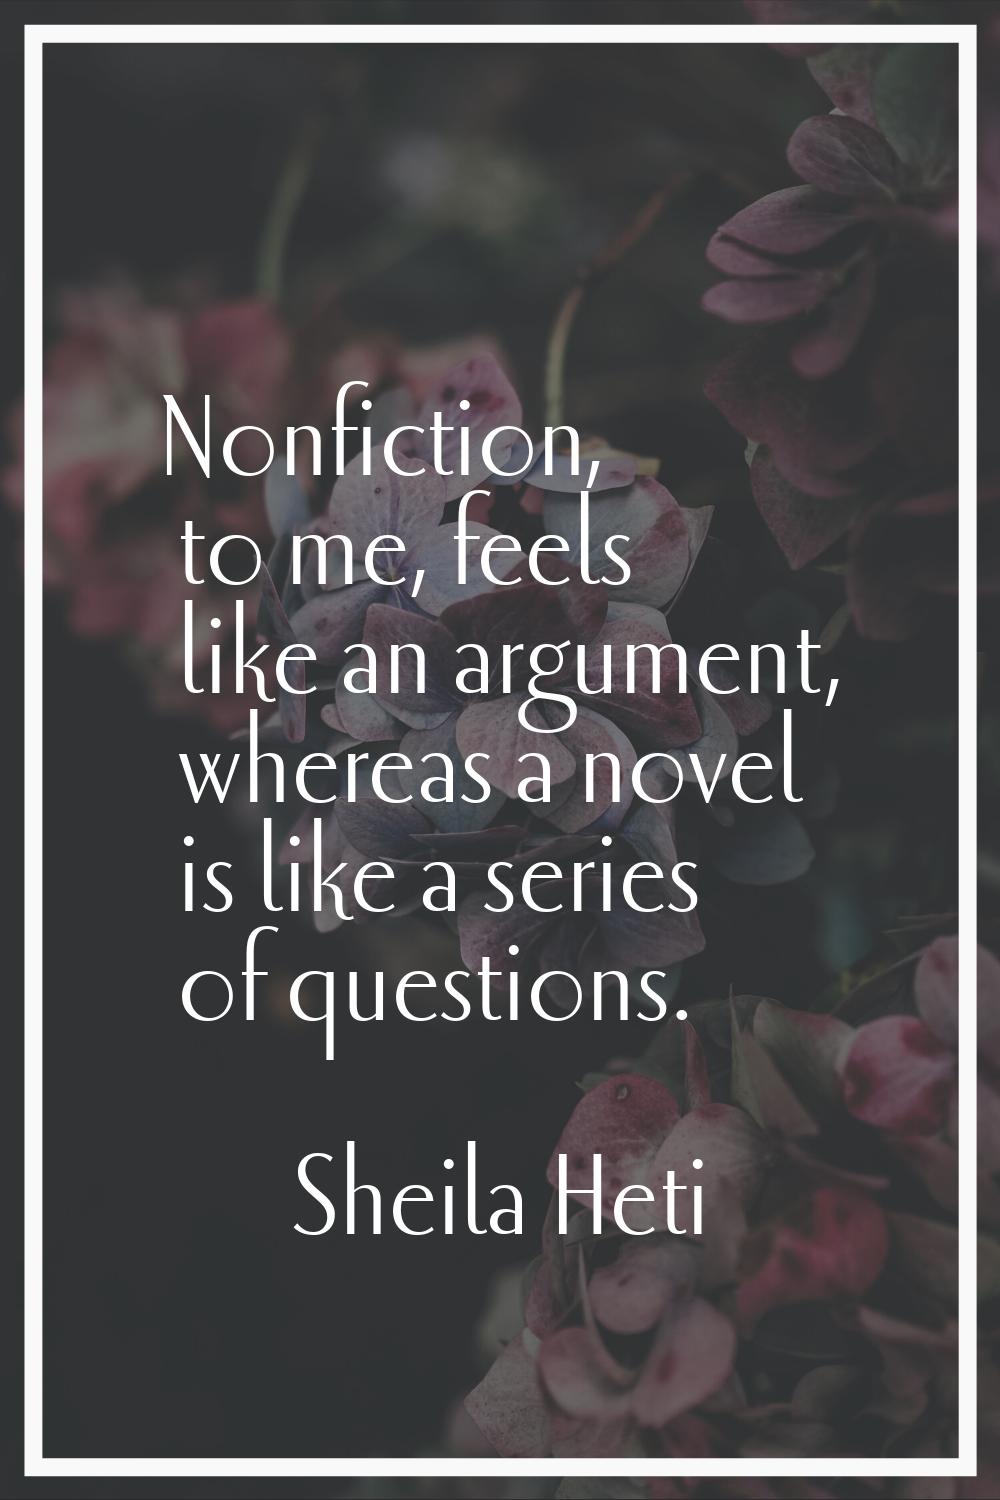 Nonfiction, to me, feels like an argument, whereas a novel is like a series of questions.